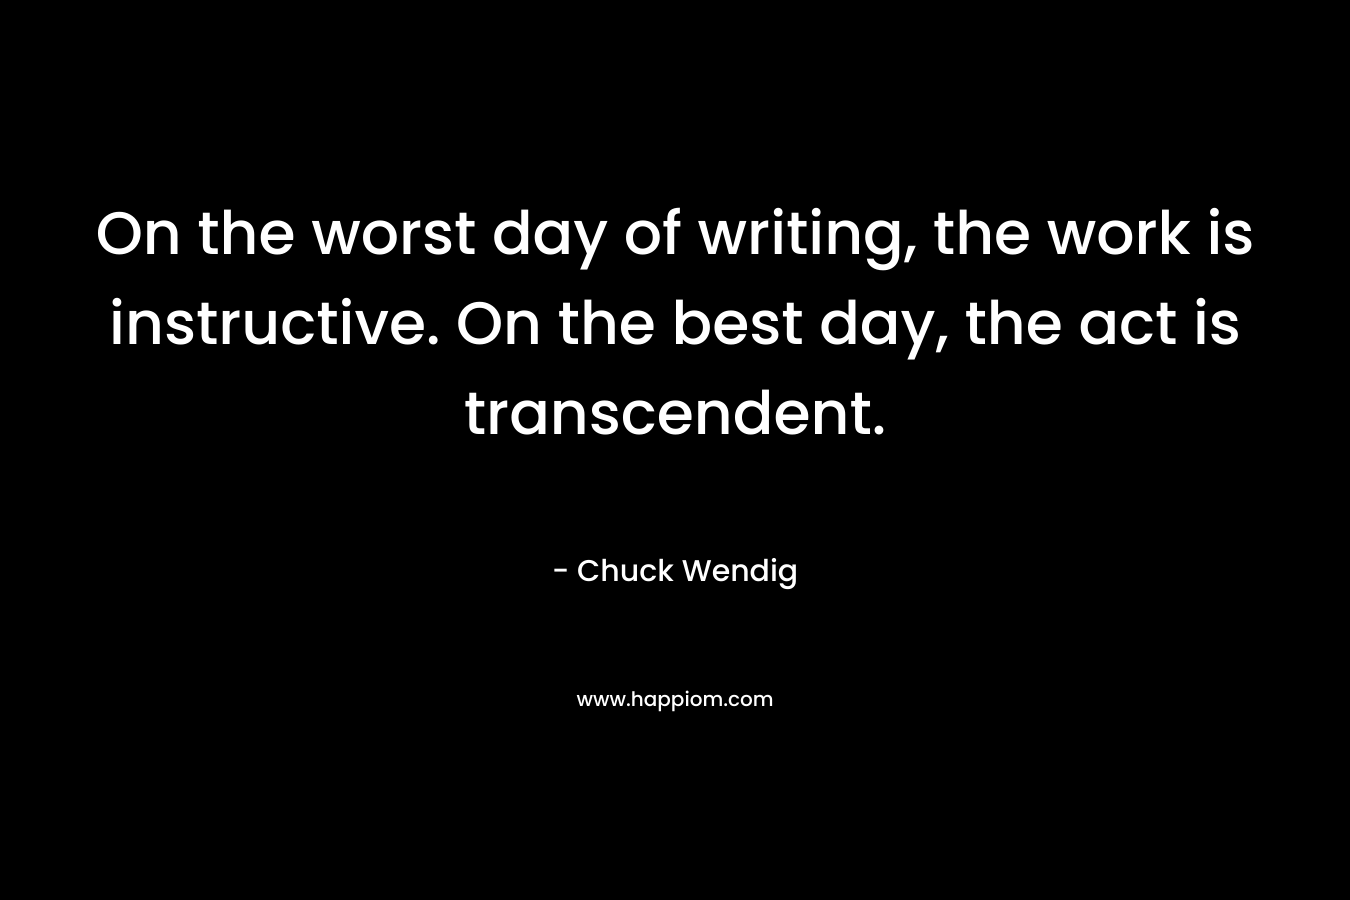 On the worst day of writing, the work is instructive. On the best day, the act is transcendent. – Chuck Wendig